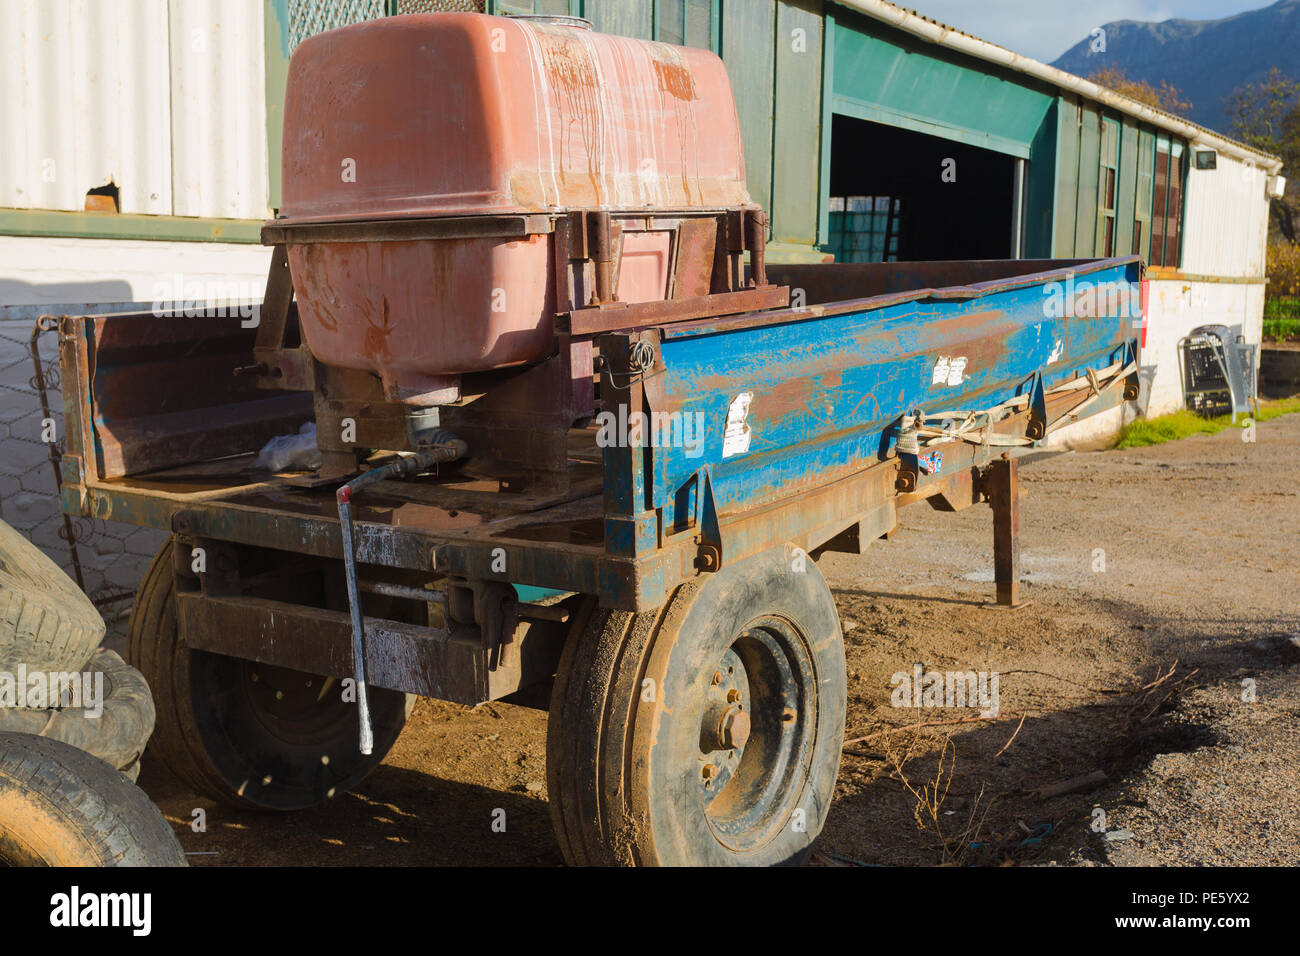 parked trailer loaded with sprayer used in the vineyards or viticulture industry outdoors next to a shed on a wine estate in Cape Town Stock Photo